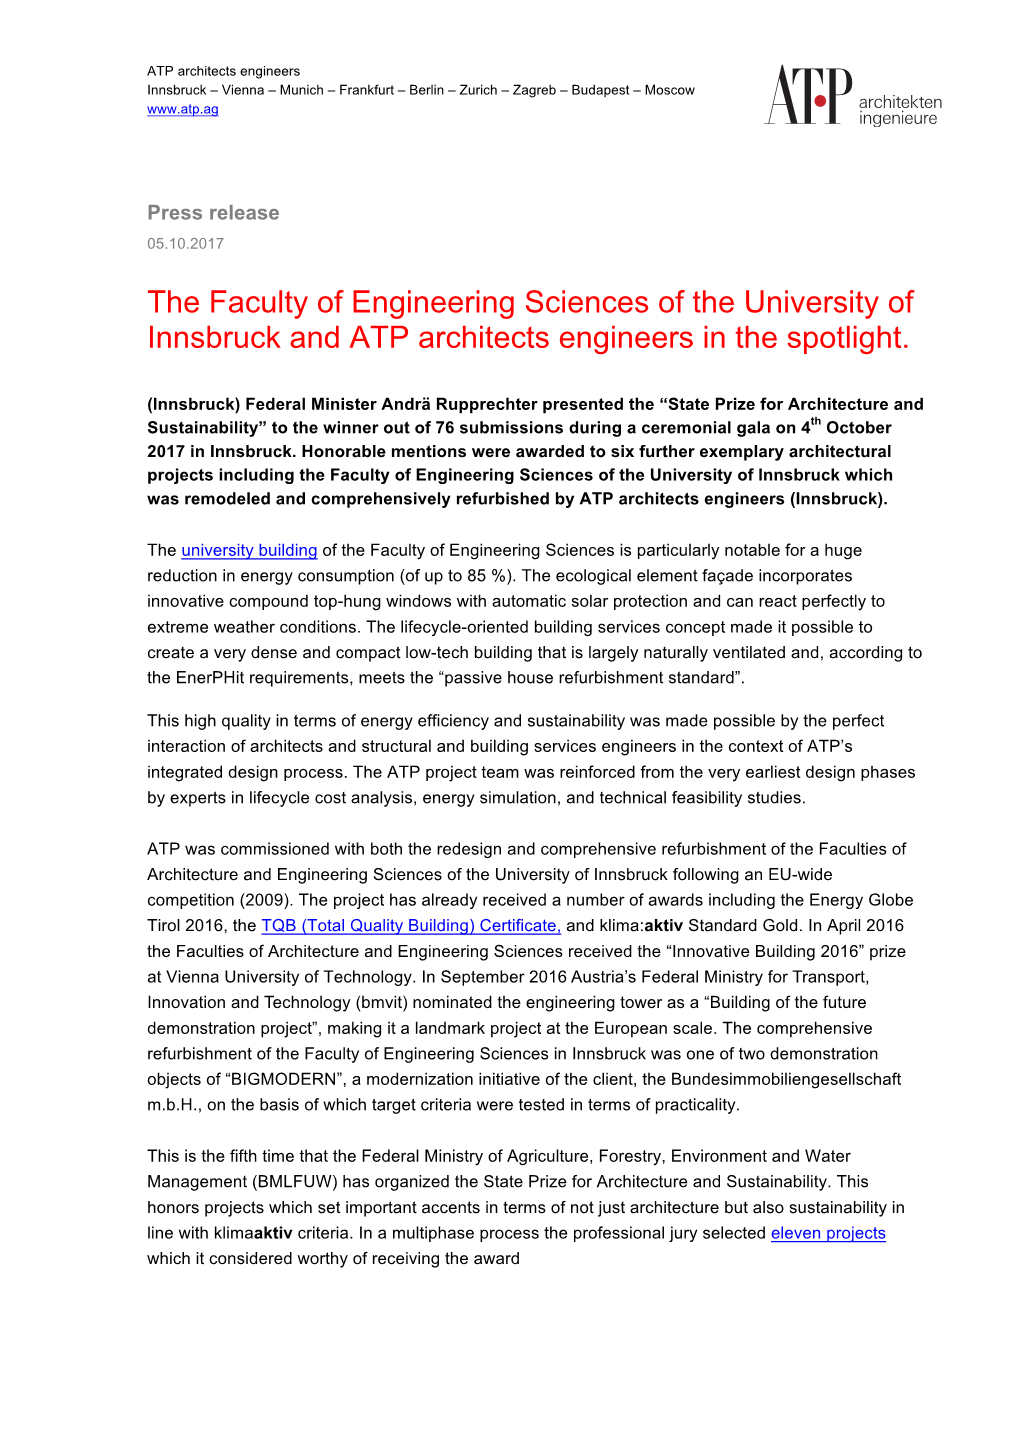 The Faculty of Engineering Sciences of the University of Innsbruck and ATP Architects Engineers in the Spotlight